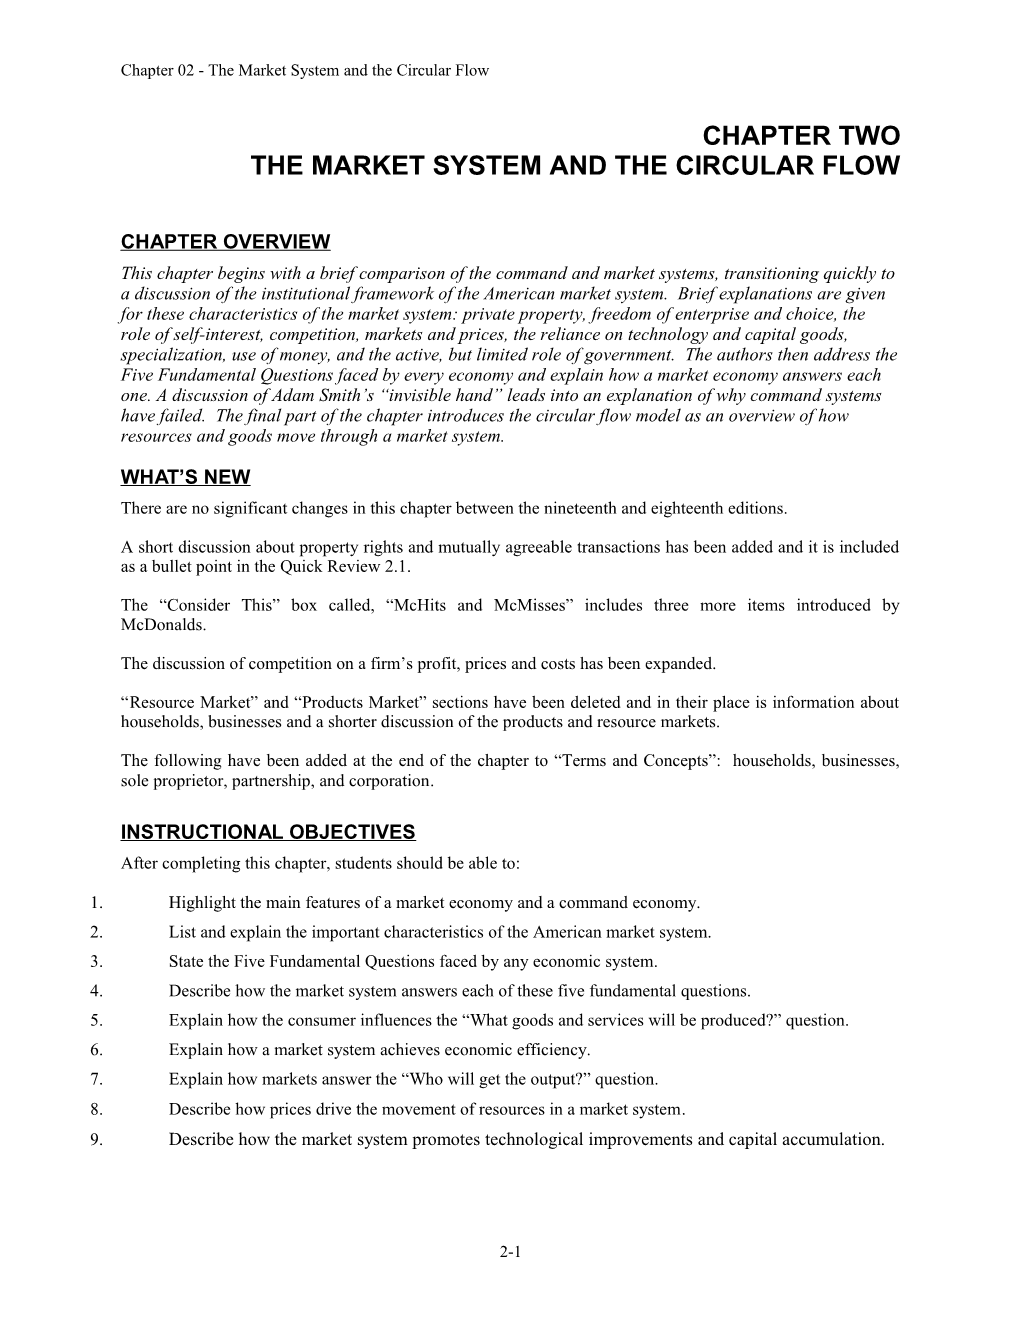 The Market SYSTEM and the Circular Flow s1